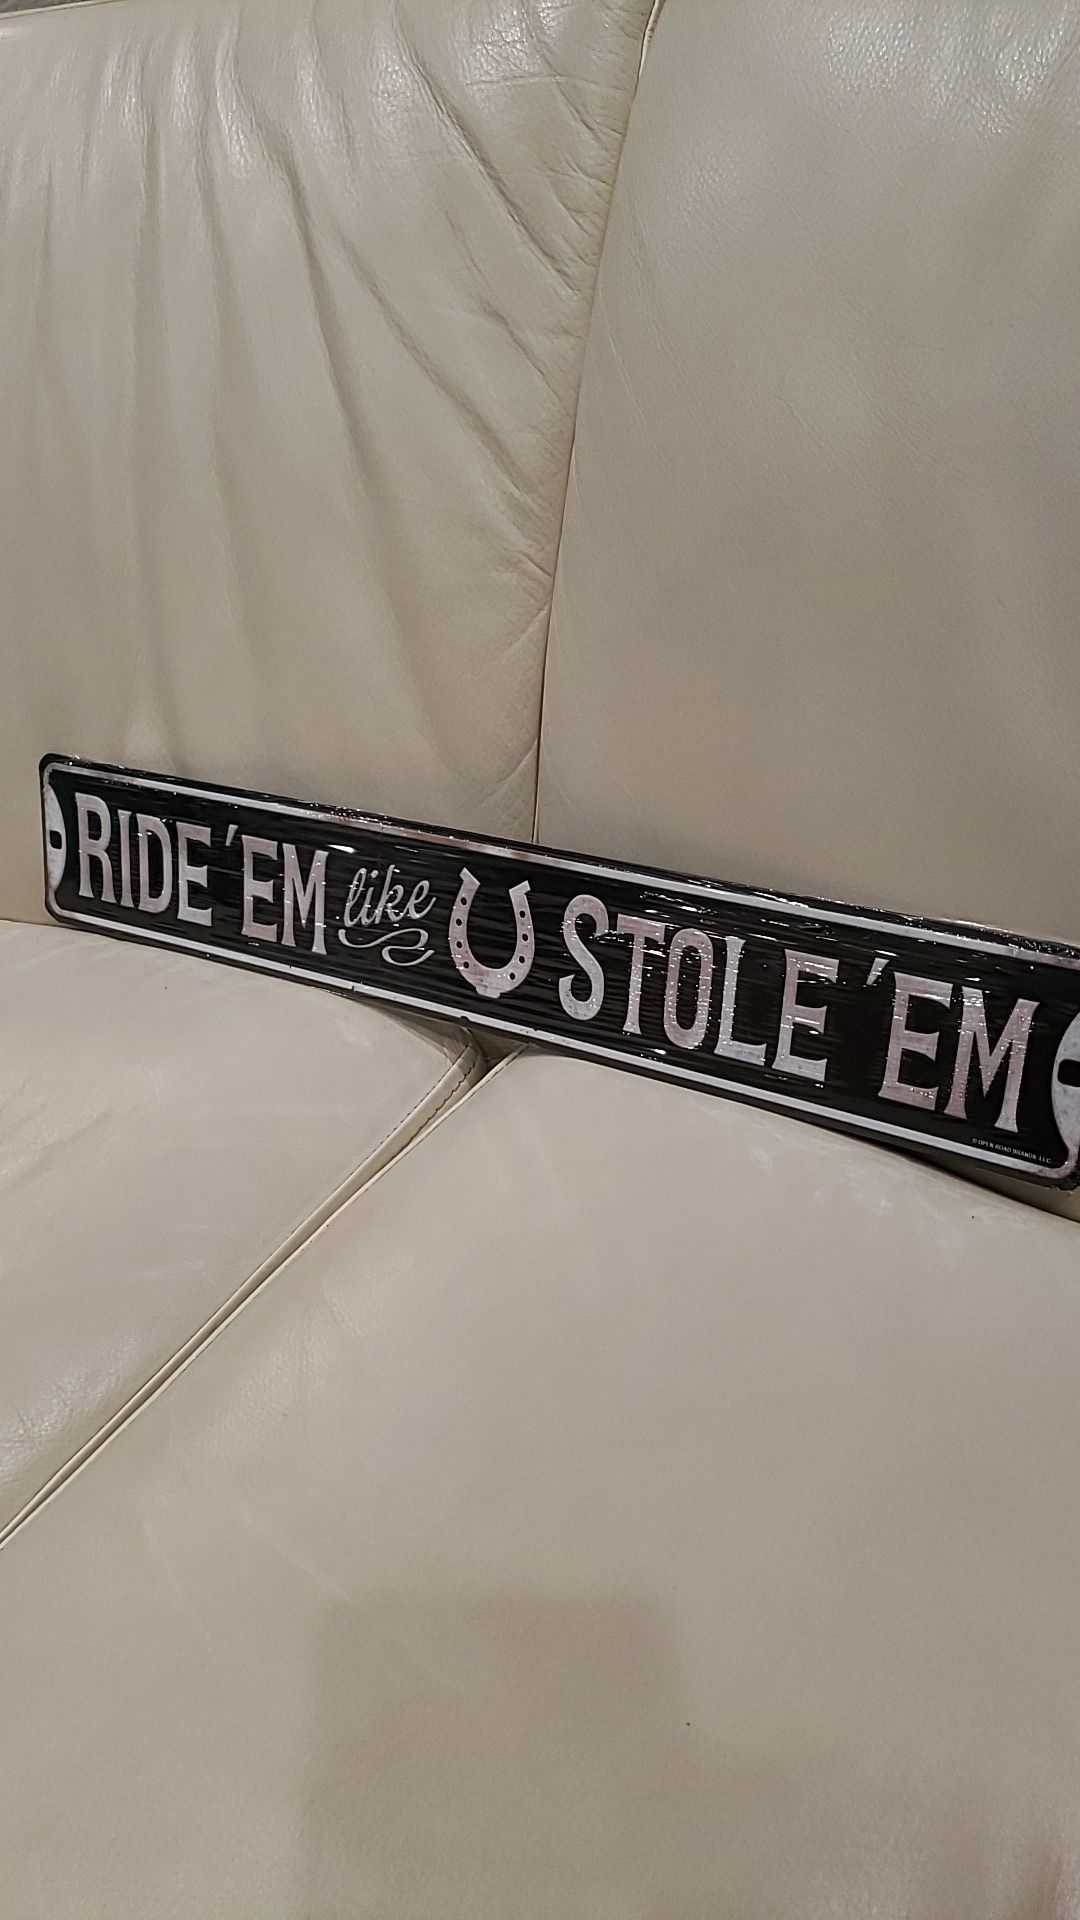 Ride 'em like you stole 'em horse back riding horse shoe wall barn embossed metal decoration sign. 20" x 3.33" brand new great present